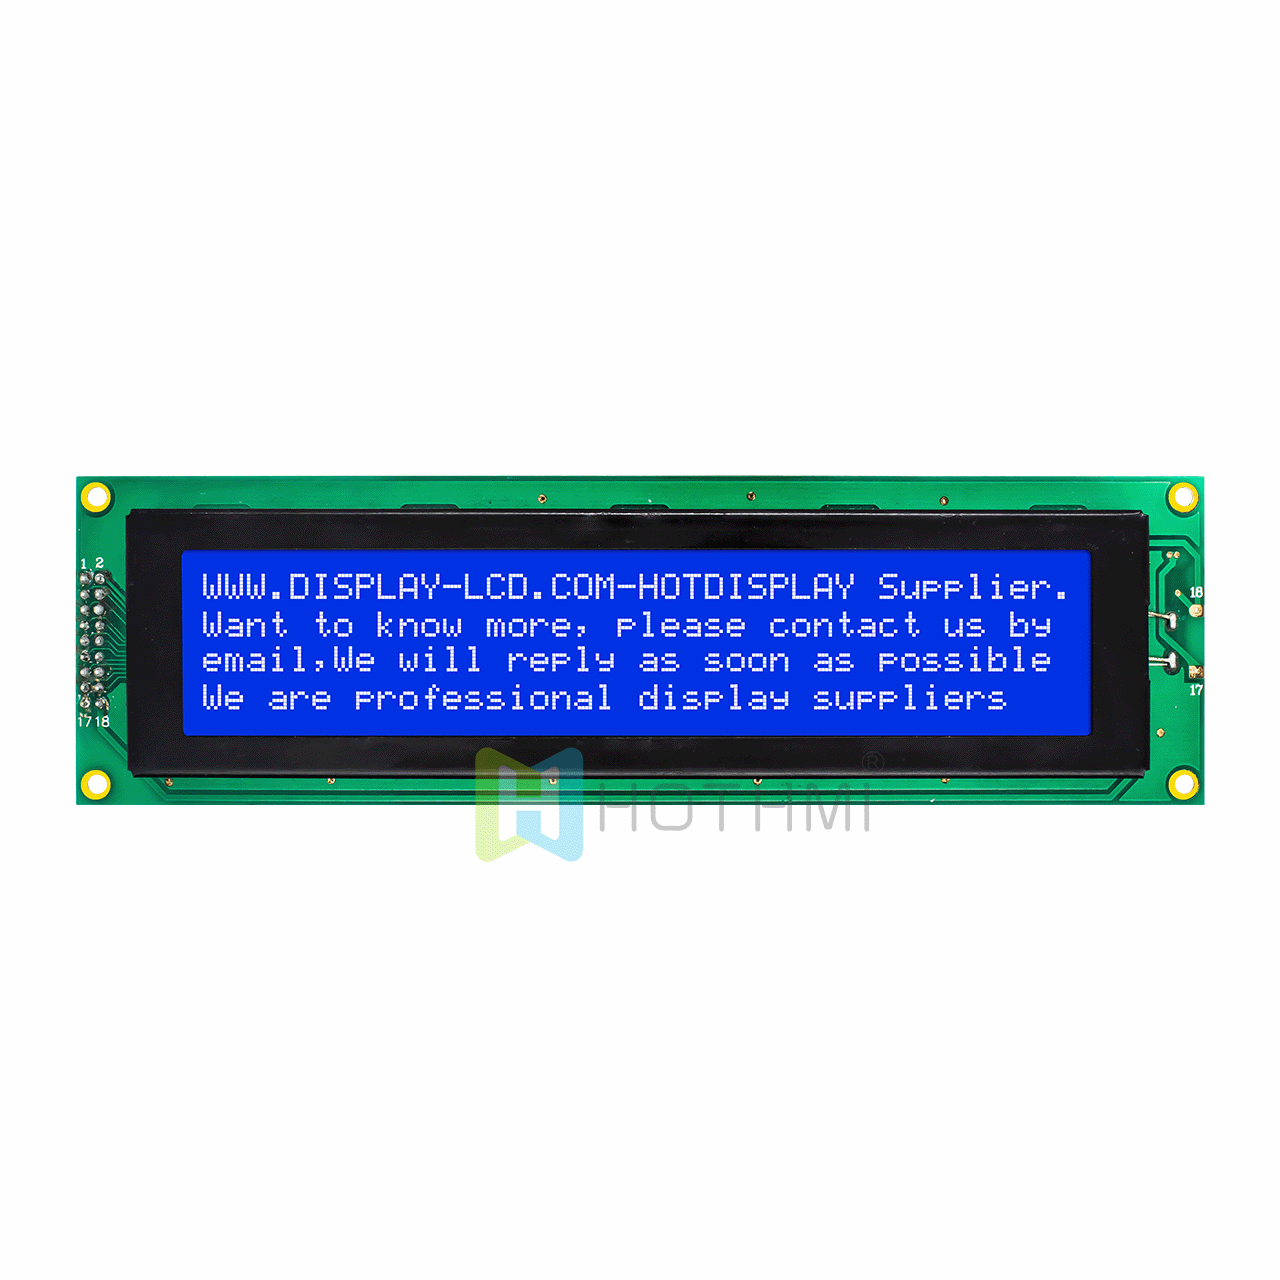 4X40 character monochrome LCD display module | STN negative display | with white backlight | Arduino display | blue background with white characters | 5.0V